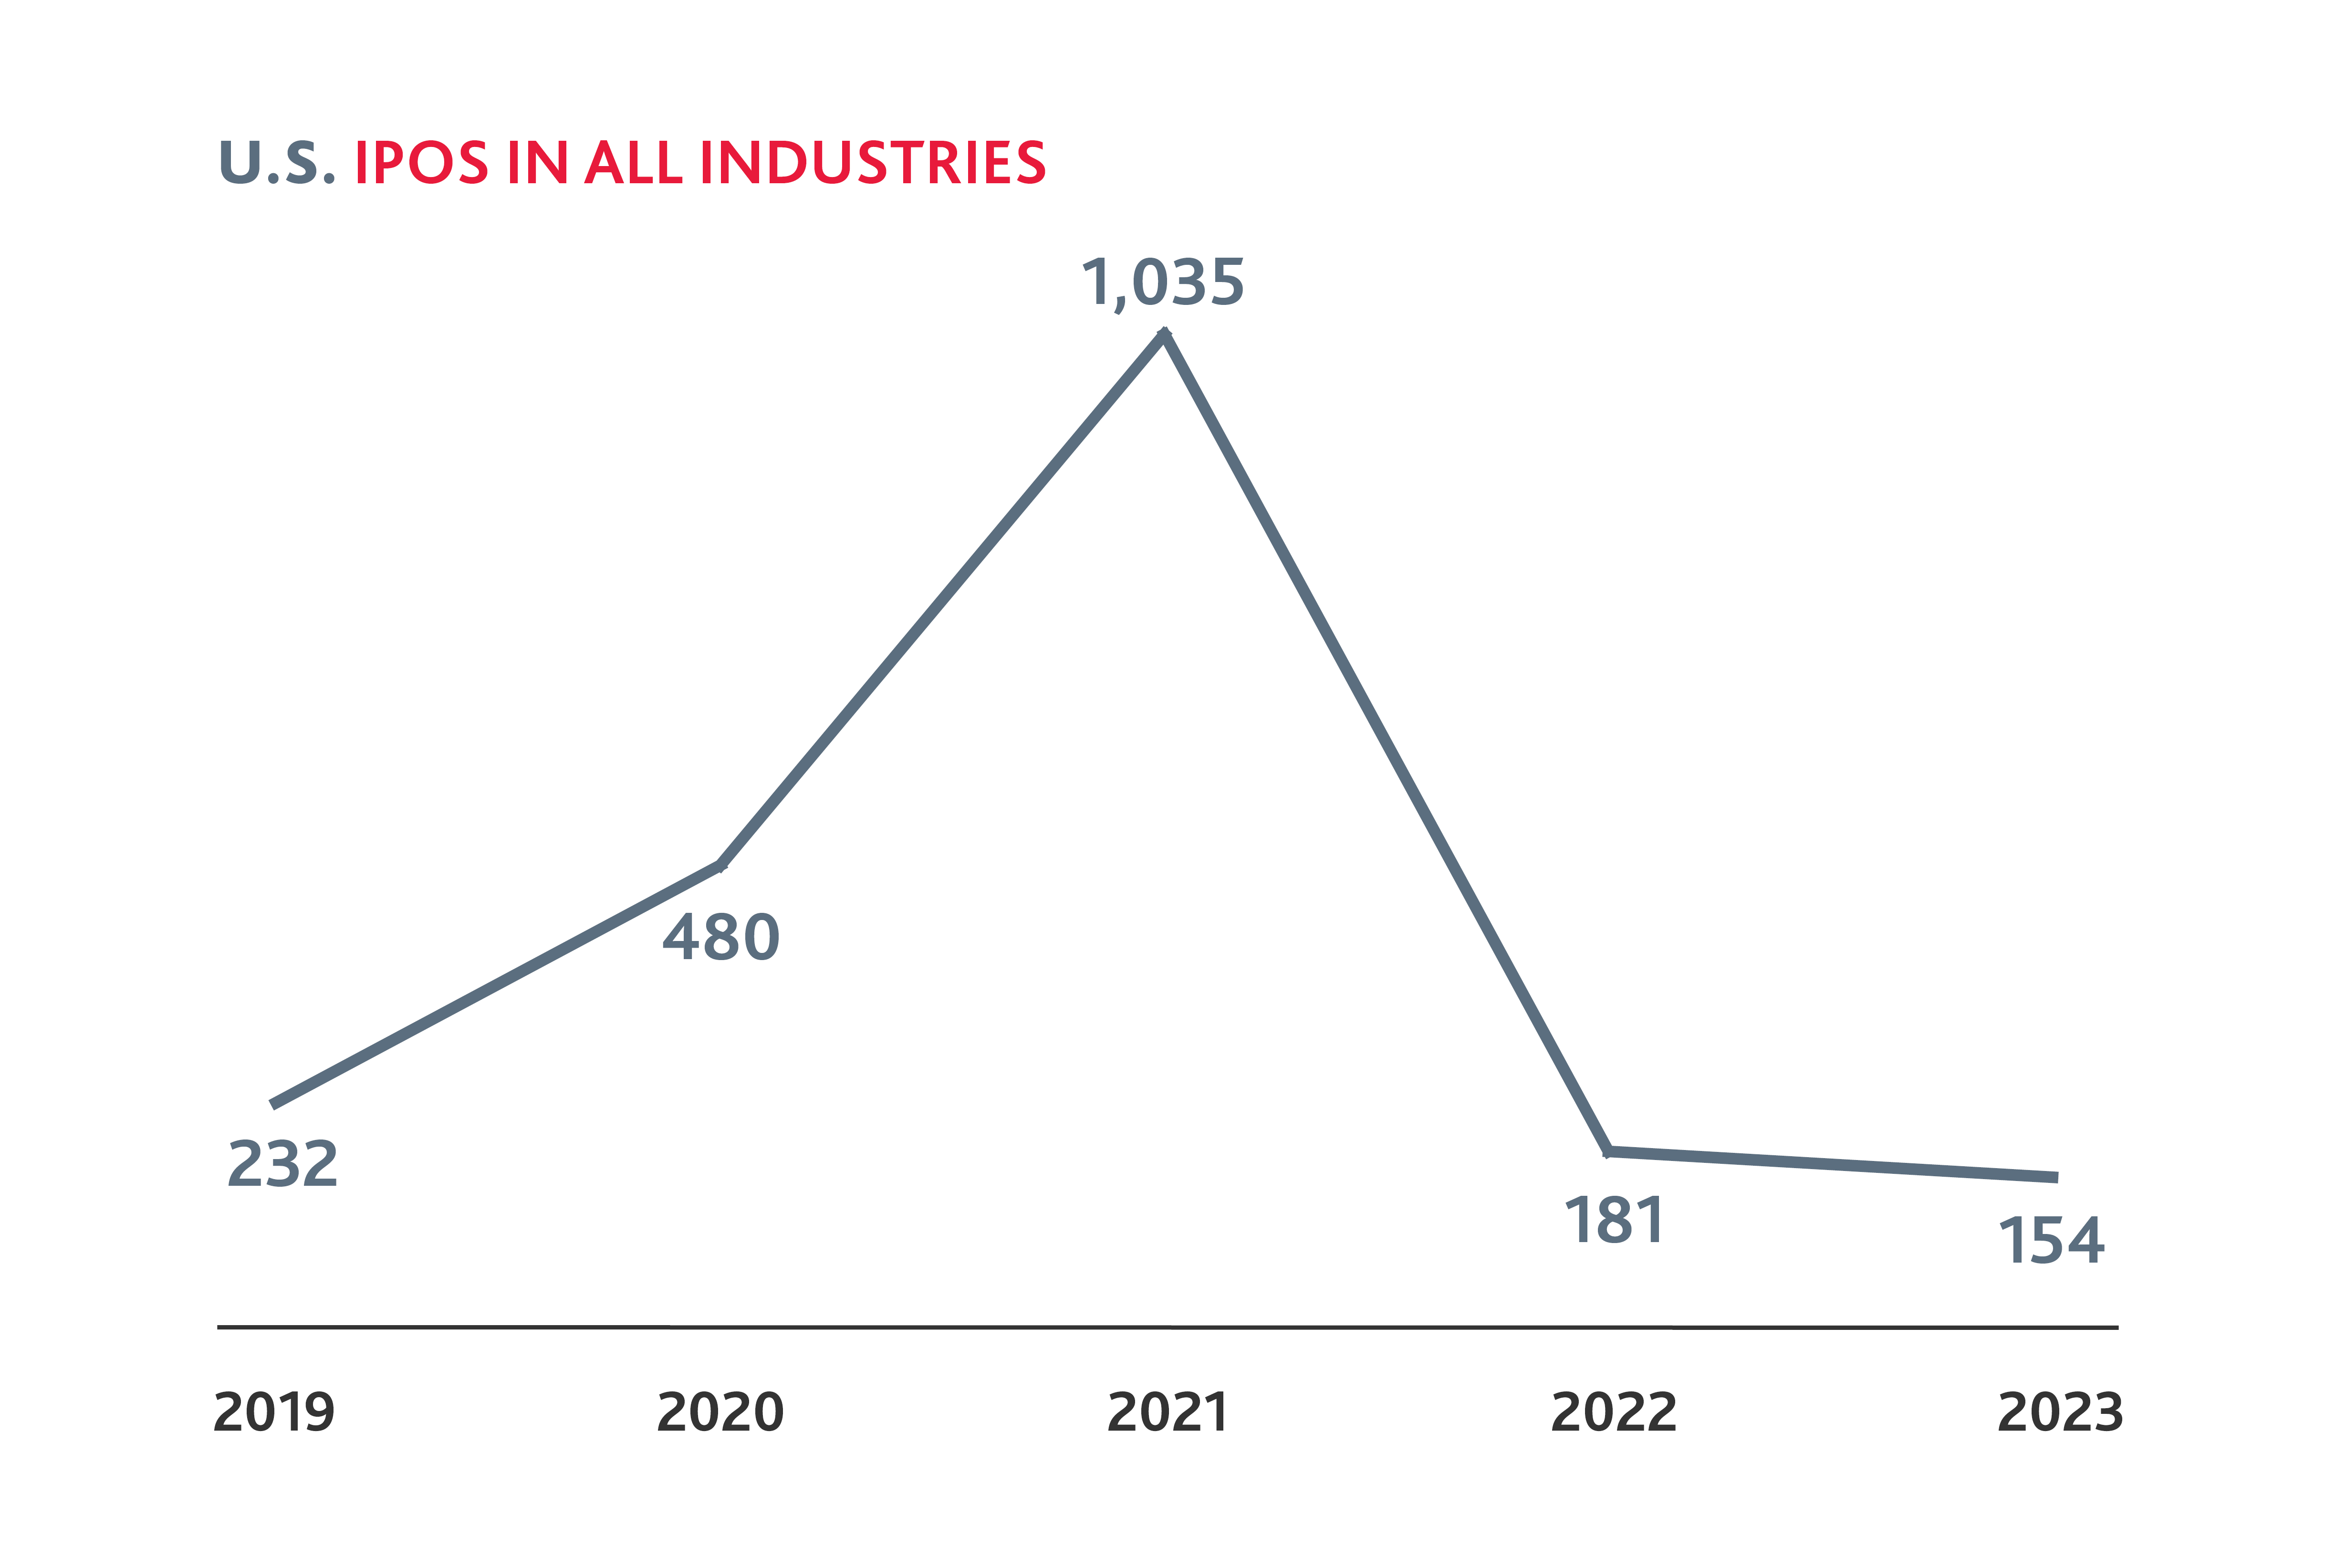 Chart showing U.S. IPOs in all industries from 2019 to 2023